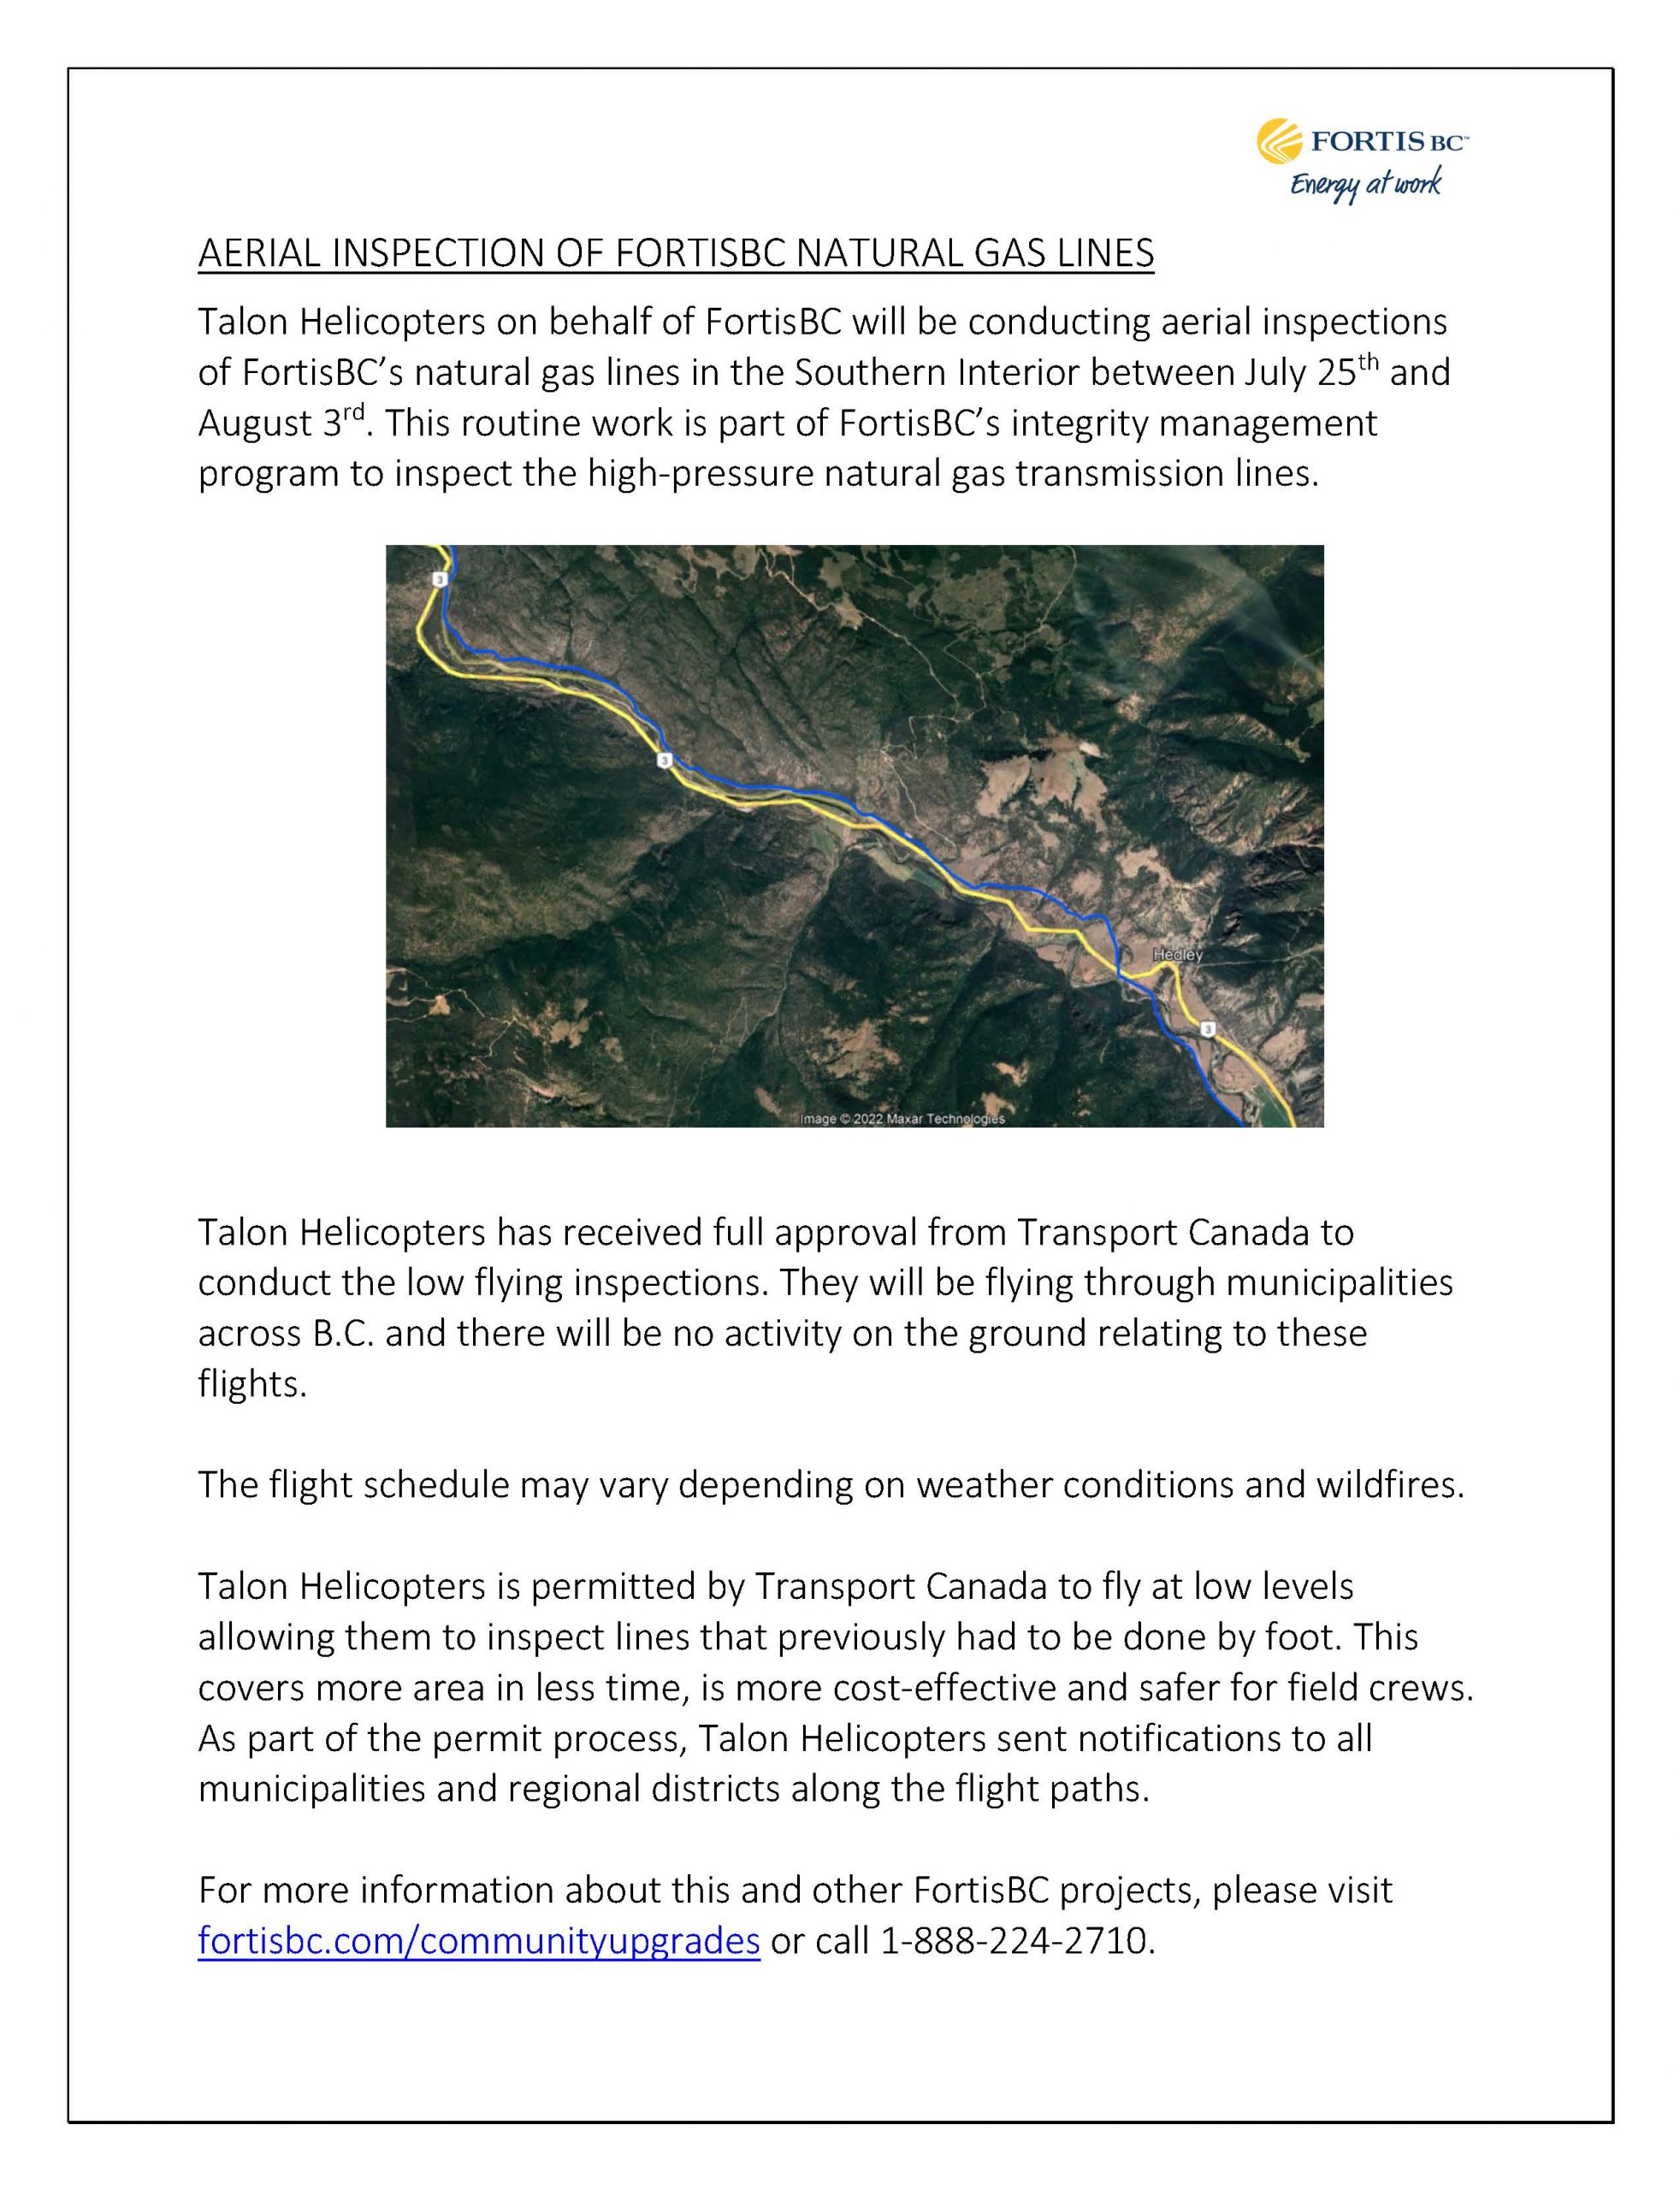 Work Notification - Aerial Survey by Talon Helicopters for FortisBC